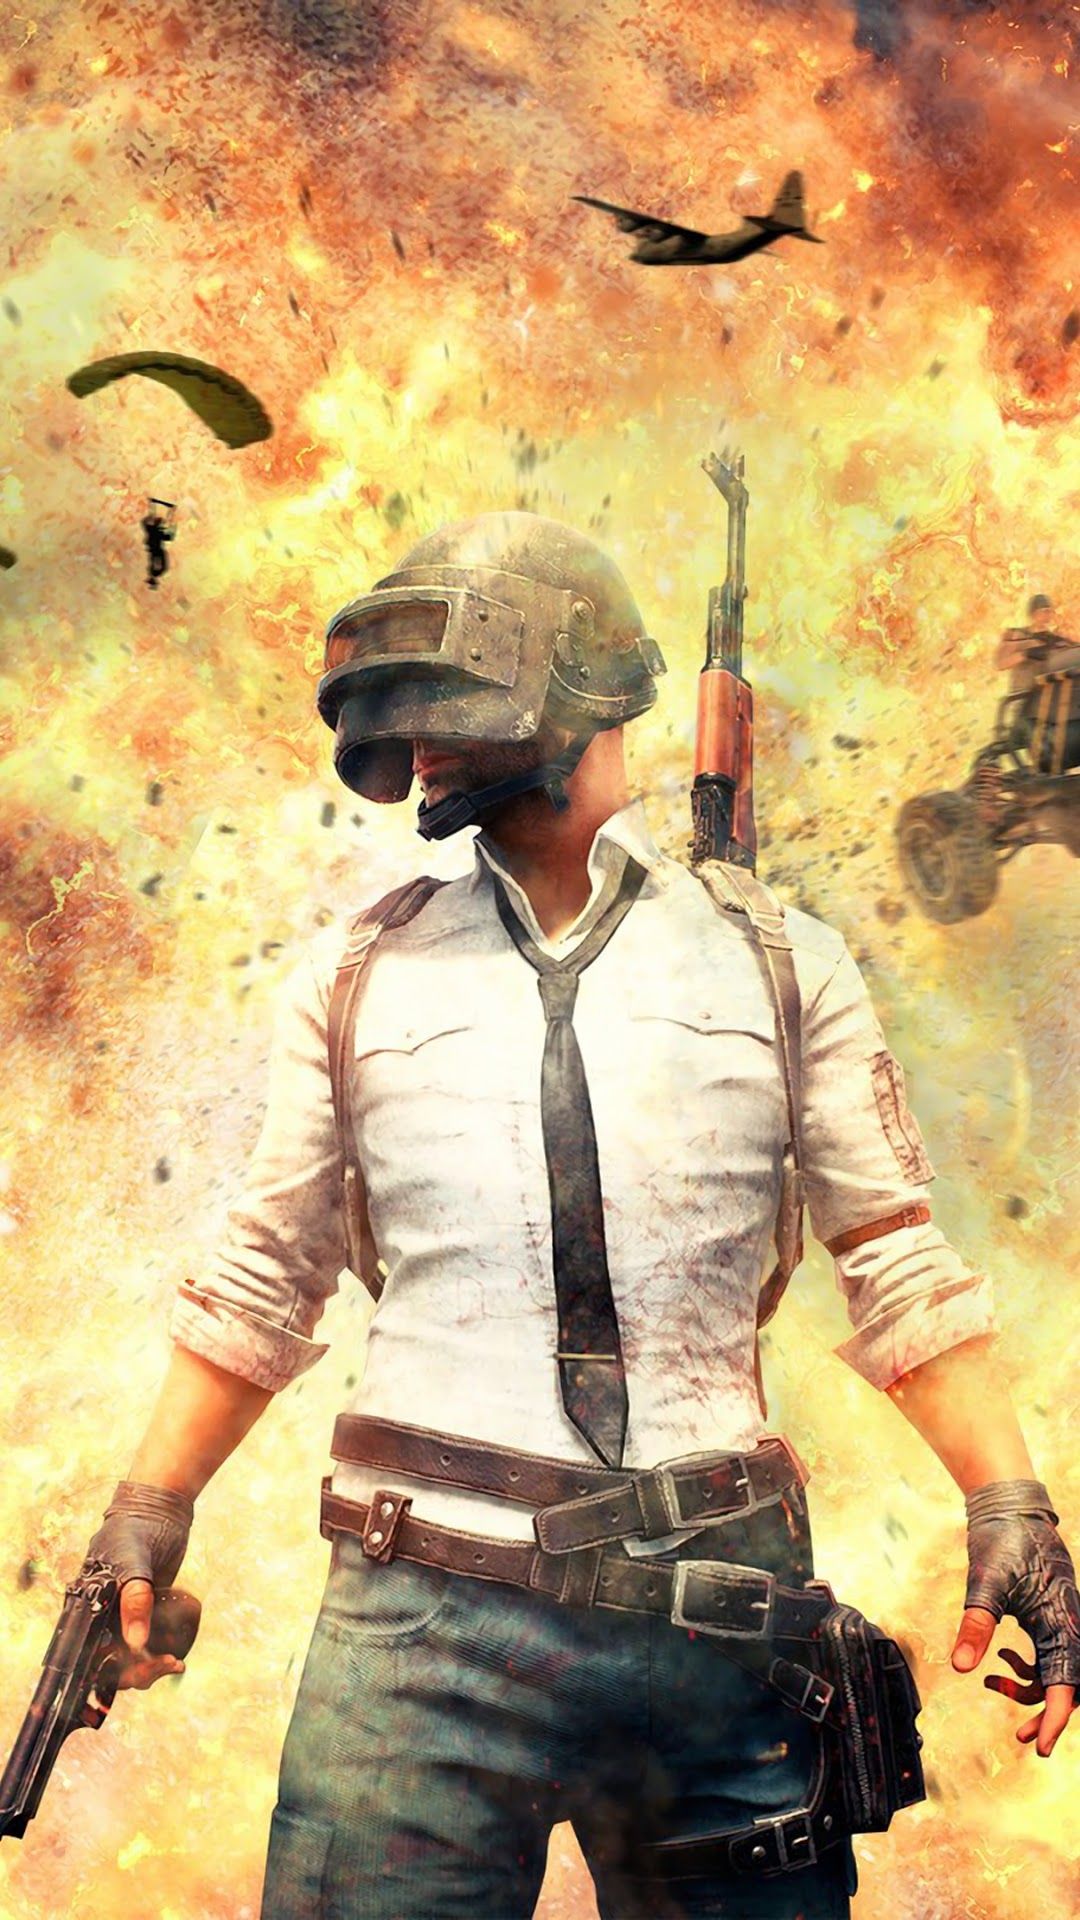 PUBG, PlayerUnknowns Battlegrounds, Explosion phone HD Wallpaper, Image, Background, Photo and Picture. Mocah HD Wallpaper